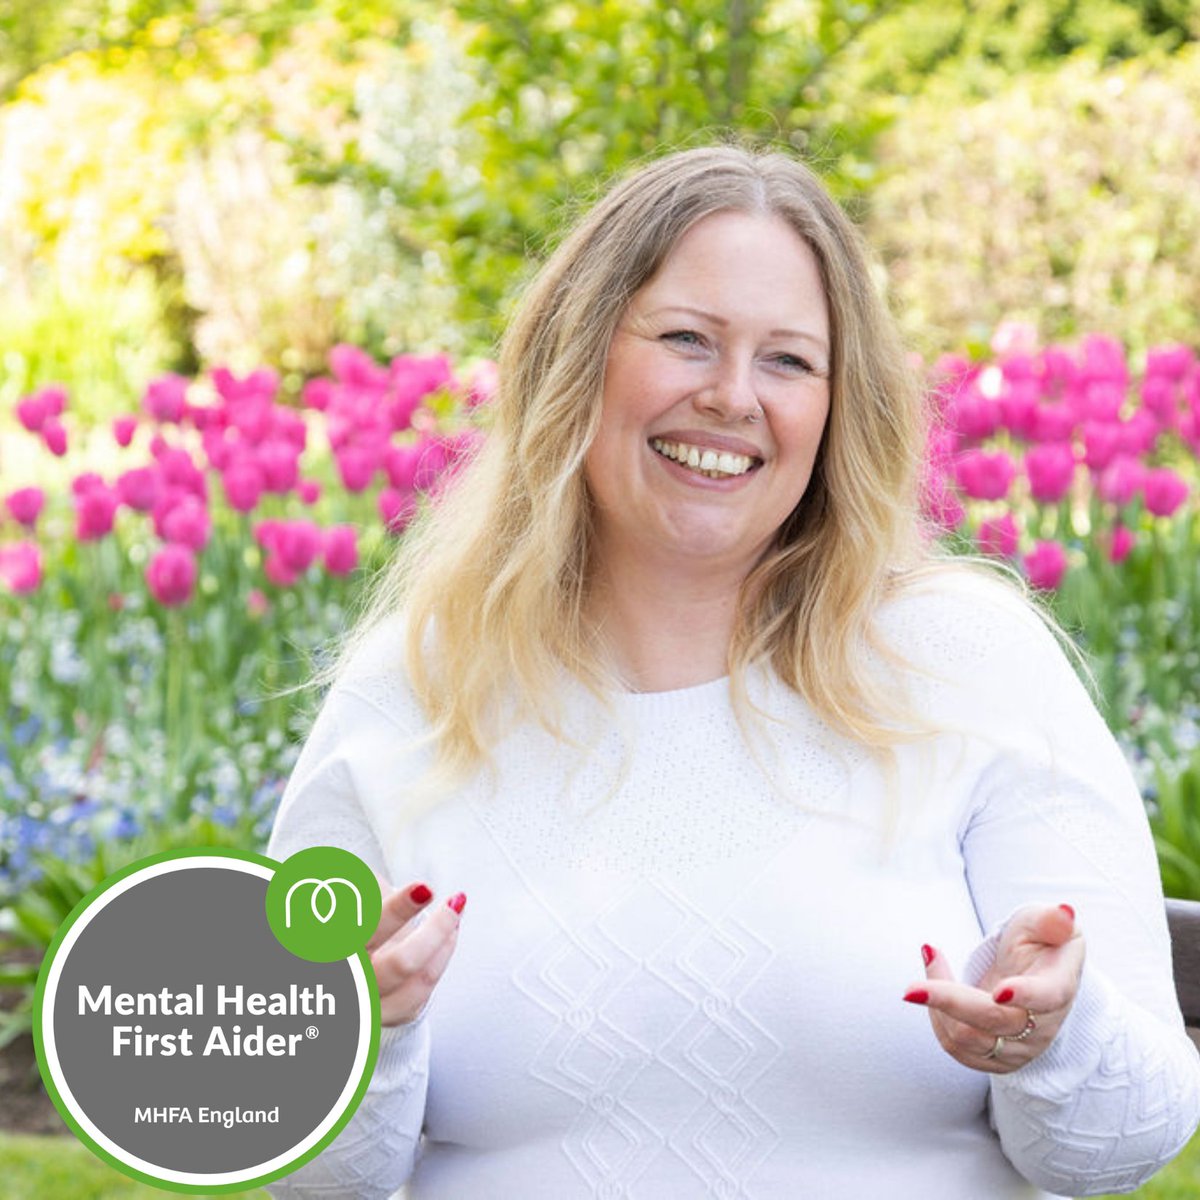 'Walking is absolutely brilliant for my mental health. It really helps to clear my head and is great for getting the body moving, relieving any built-up pressure or tension.' Kim - Mental Health First Aider. #mentalhealthawarenessweek #MoveYourWay #MHFA